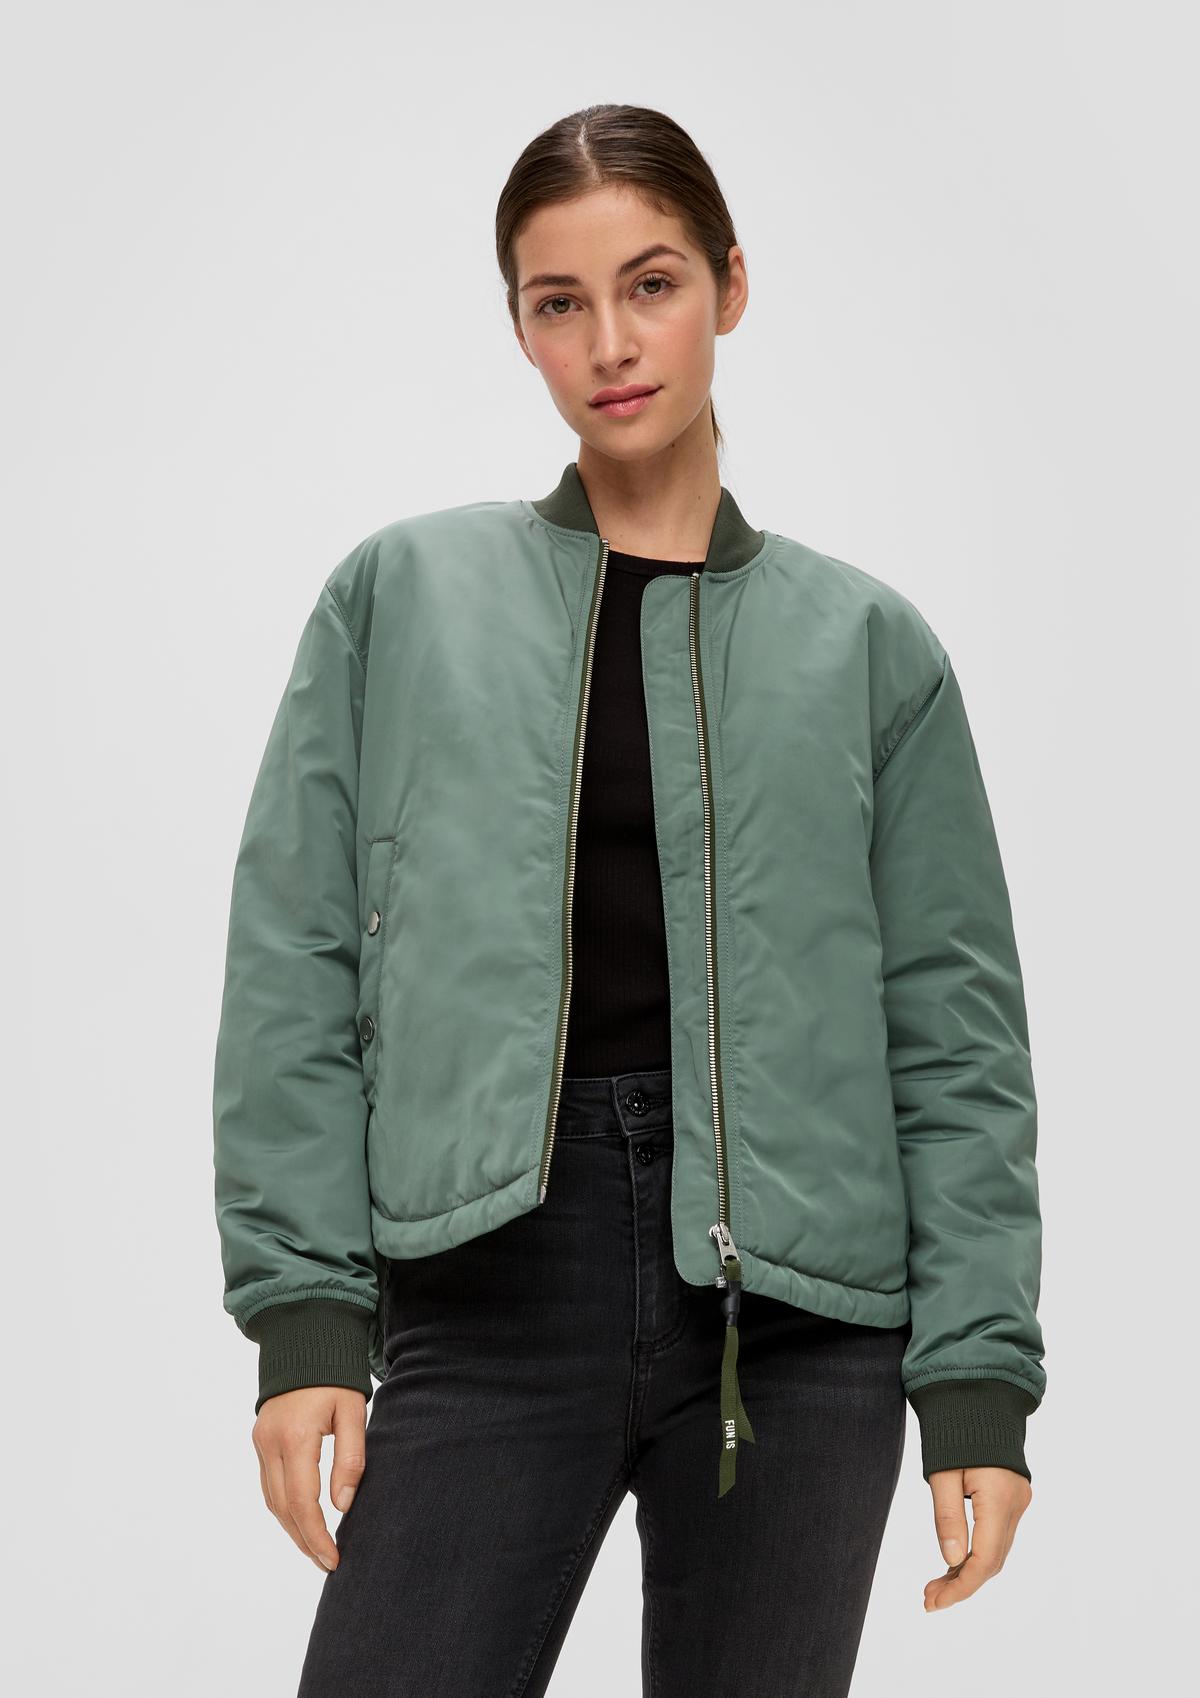 Bomber jacket with a stand-up collar